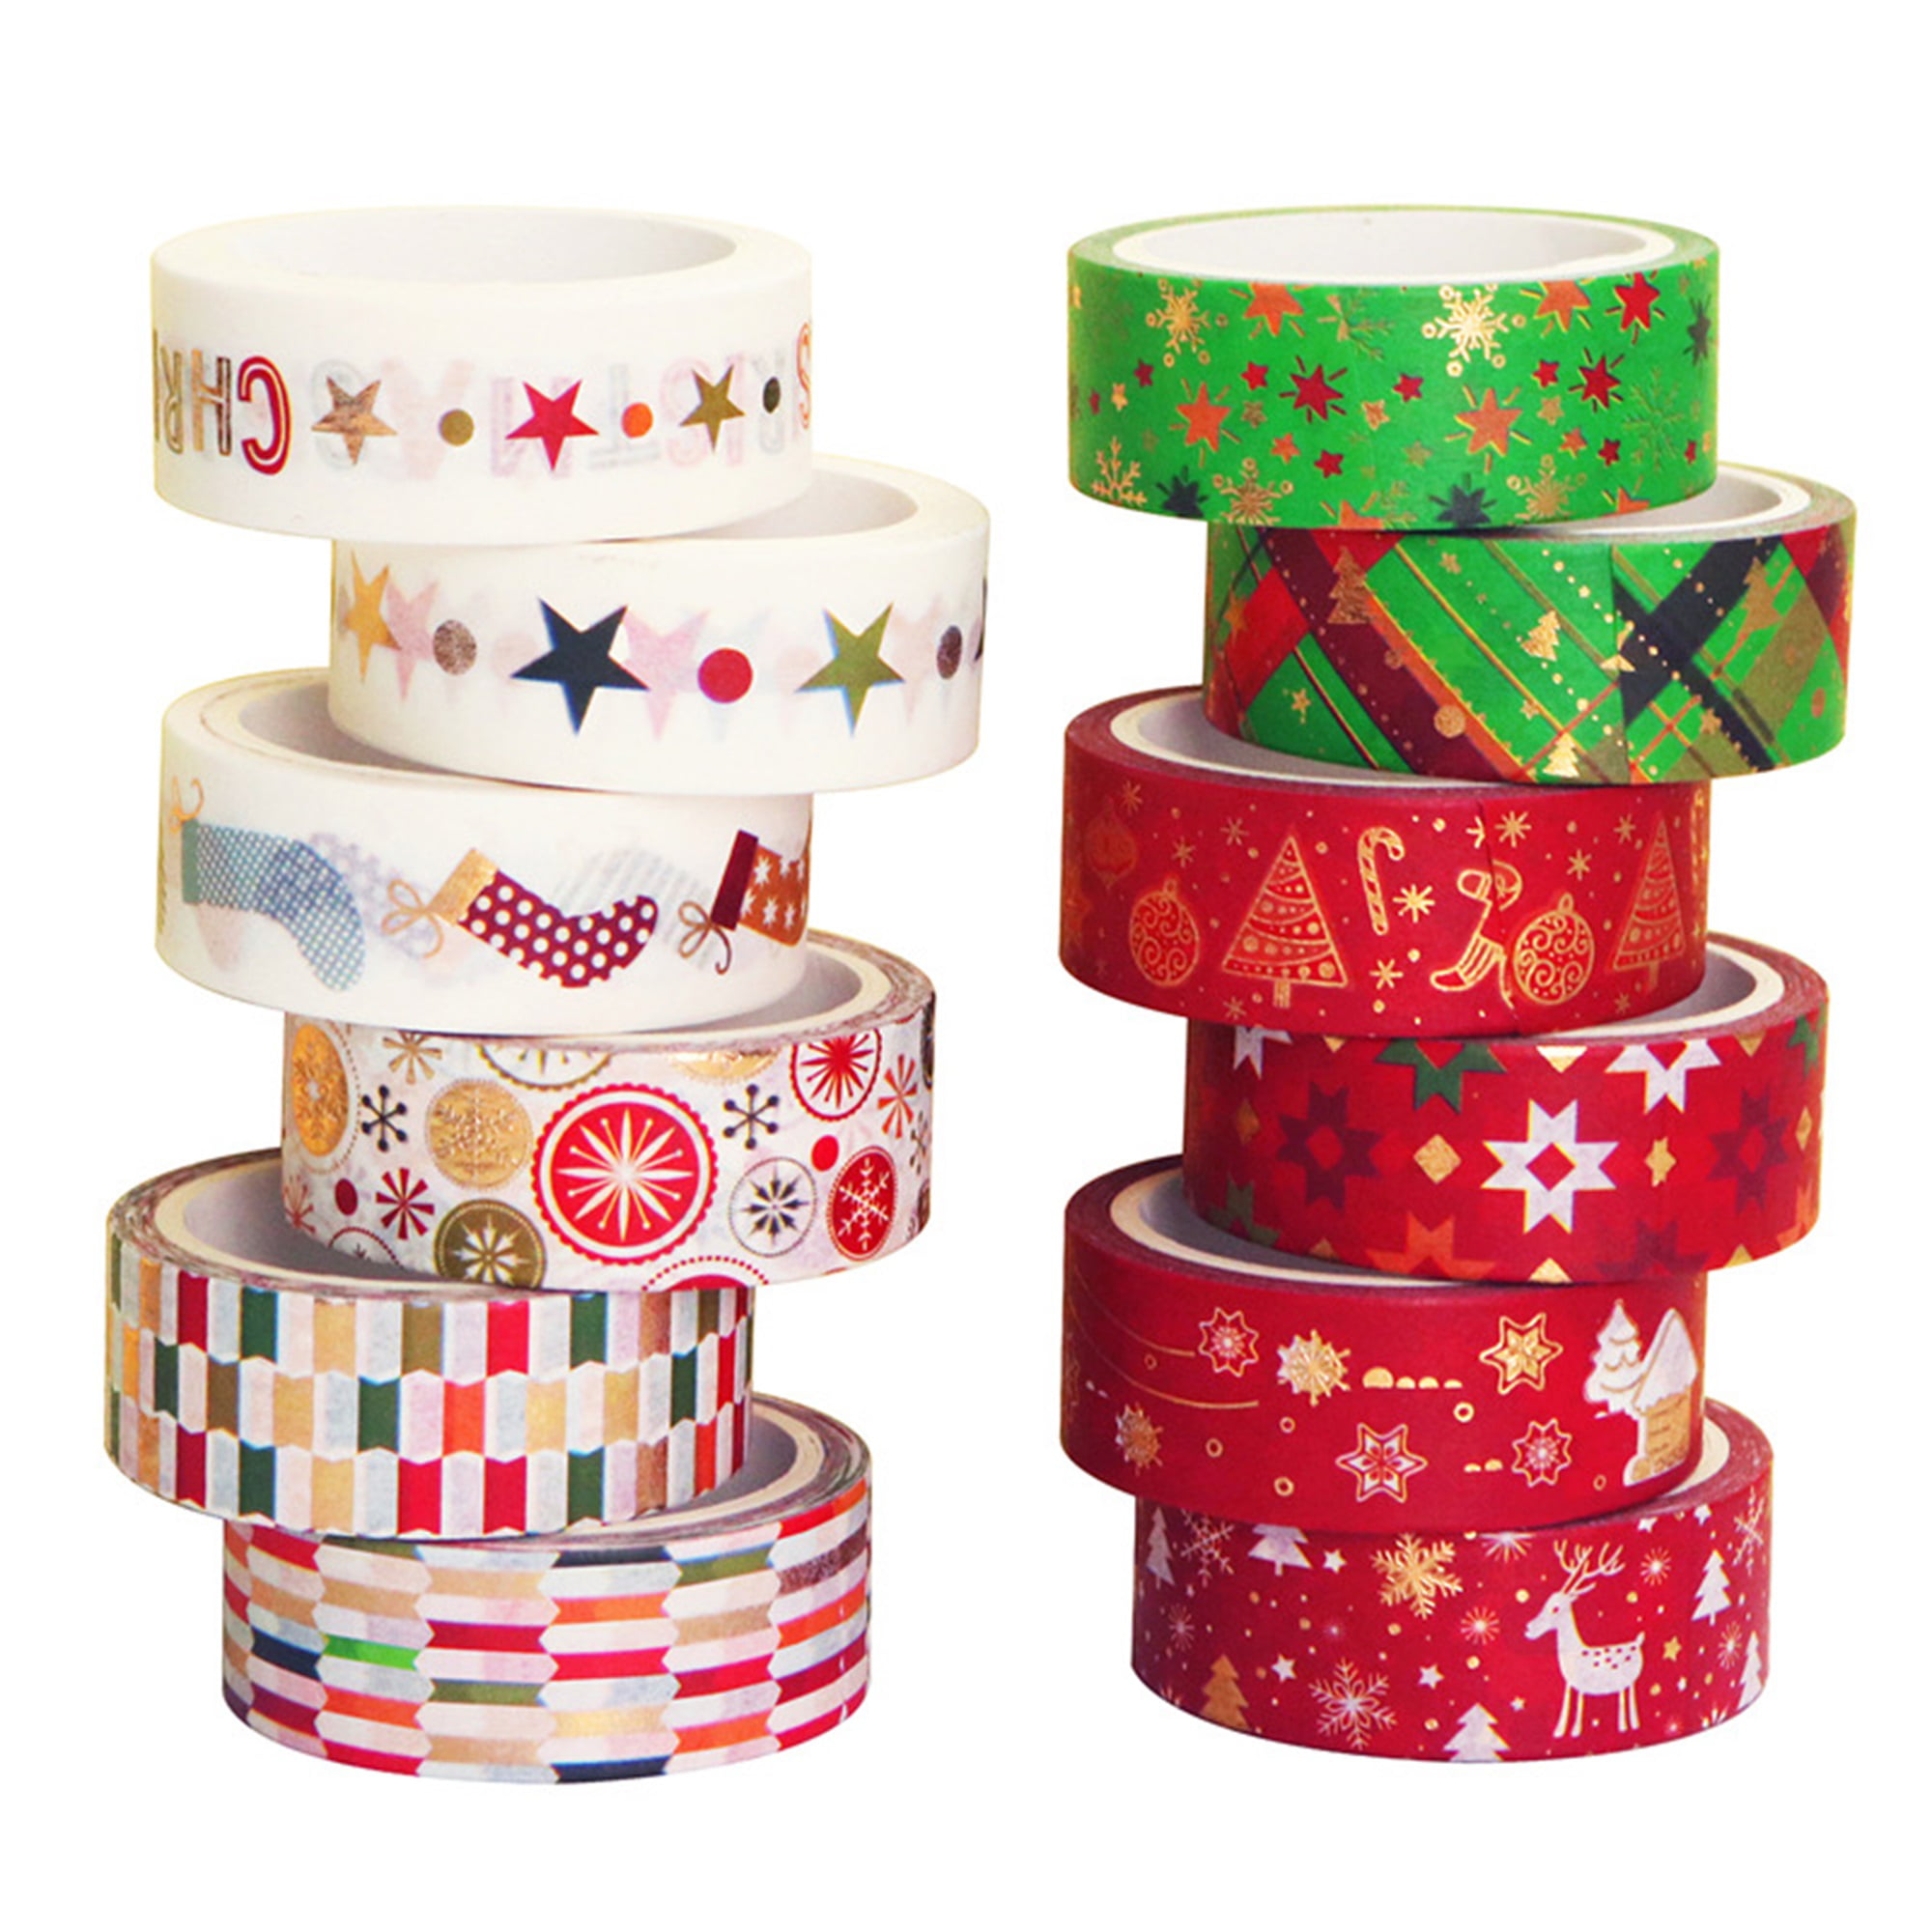 10Rolls Merry Christmas Masking Tape Decorative for Xmas Decor Holiday Christmas Party Favors Craft Supplies Christmas Washi Tape Set 0.6 x 16.4ft 